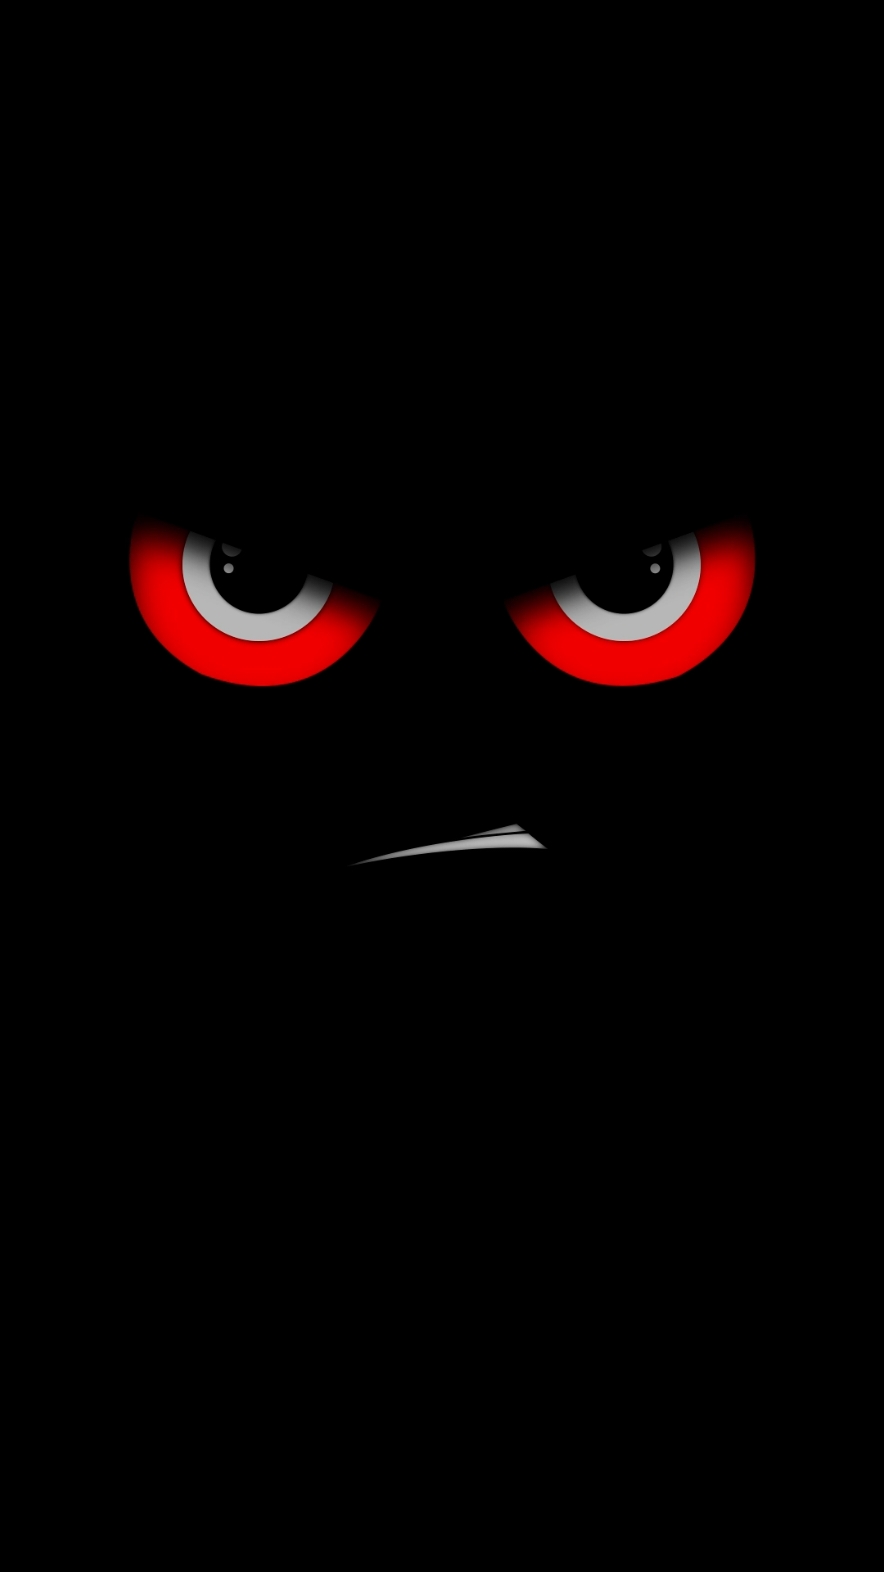 Dubious And Angry Face Live Wallpaper | Support me on Tiktok Series #fypシ #emojiwallpaper #emojiface #dubious #4klivewallpaper #4klivewallpapers #4klivewallpaper👀 #livewallpaper #livewallpapers #livewallpaper4k #hdlivewallpaper #hdwallpaper #hightquality #fondodepantalla #fondodepantallaanimado #livewallpaper #zhivyye_oboi #livewallpaper77 #wallpapervideo #wallpaperhidup4k #popularvideo #popular 